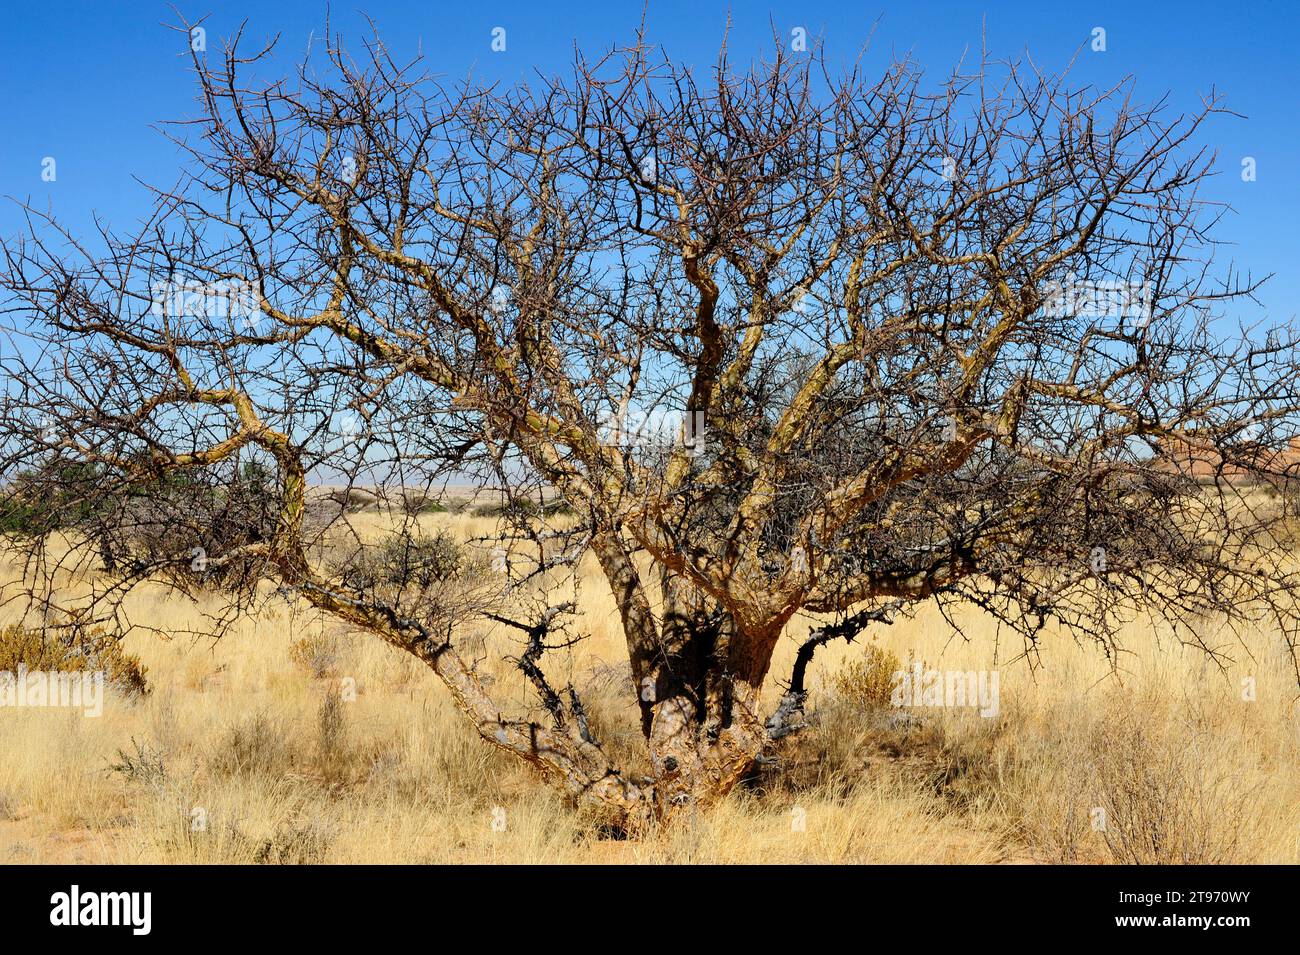 Blue-leaved corkwood (Commiphora glaucescens) is a little deciduous tree of the Burseraceae family. This photo was taken in Spitzkoppe, Namibia. Stock Photo